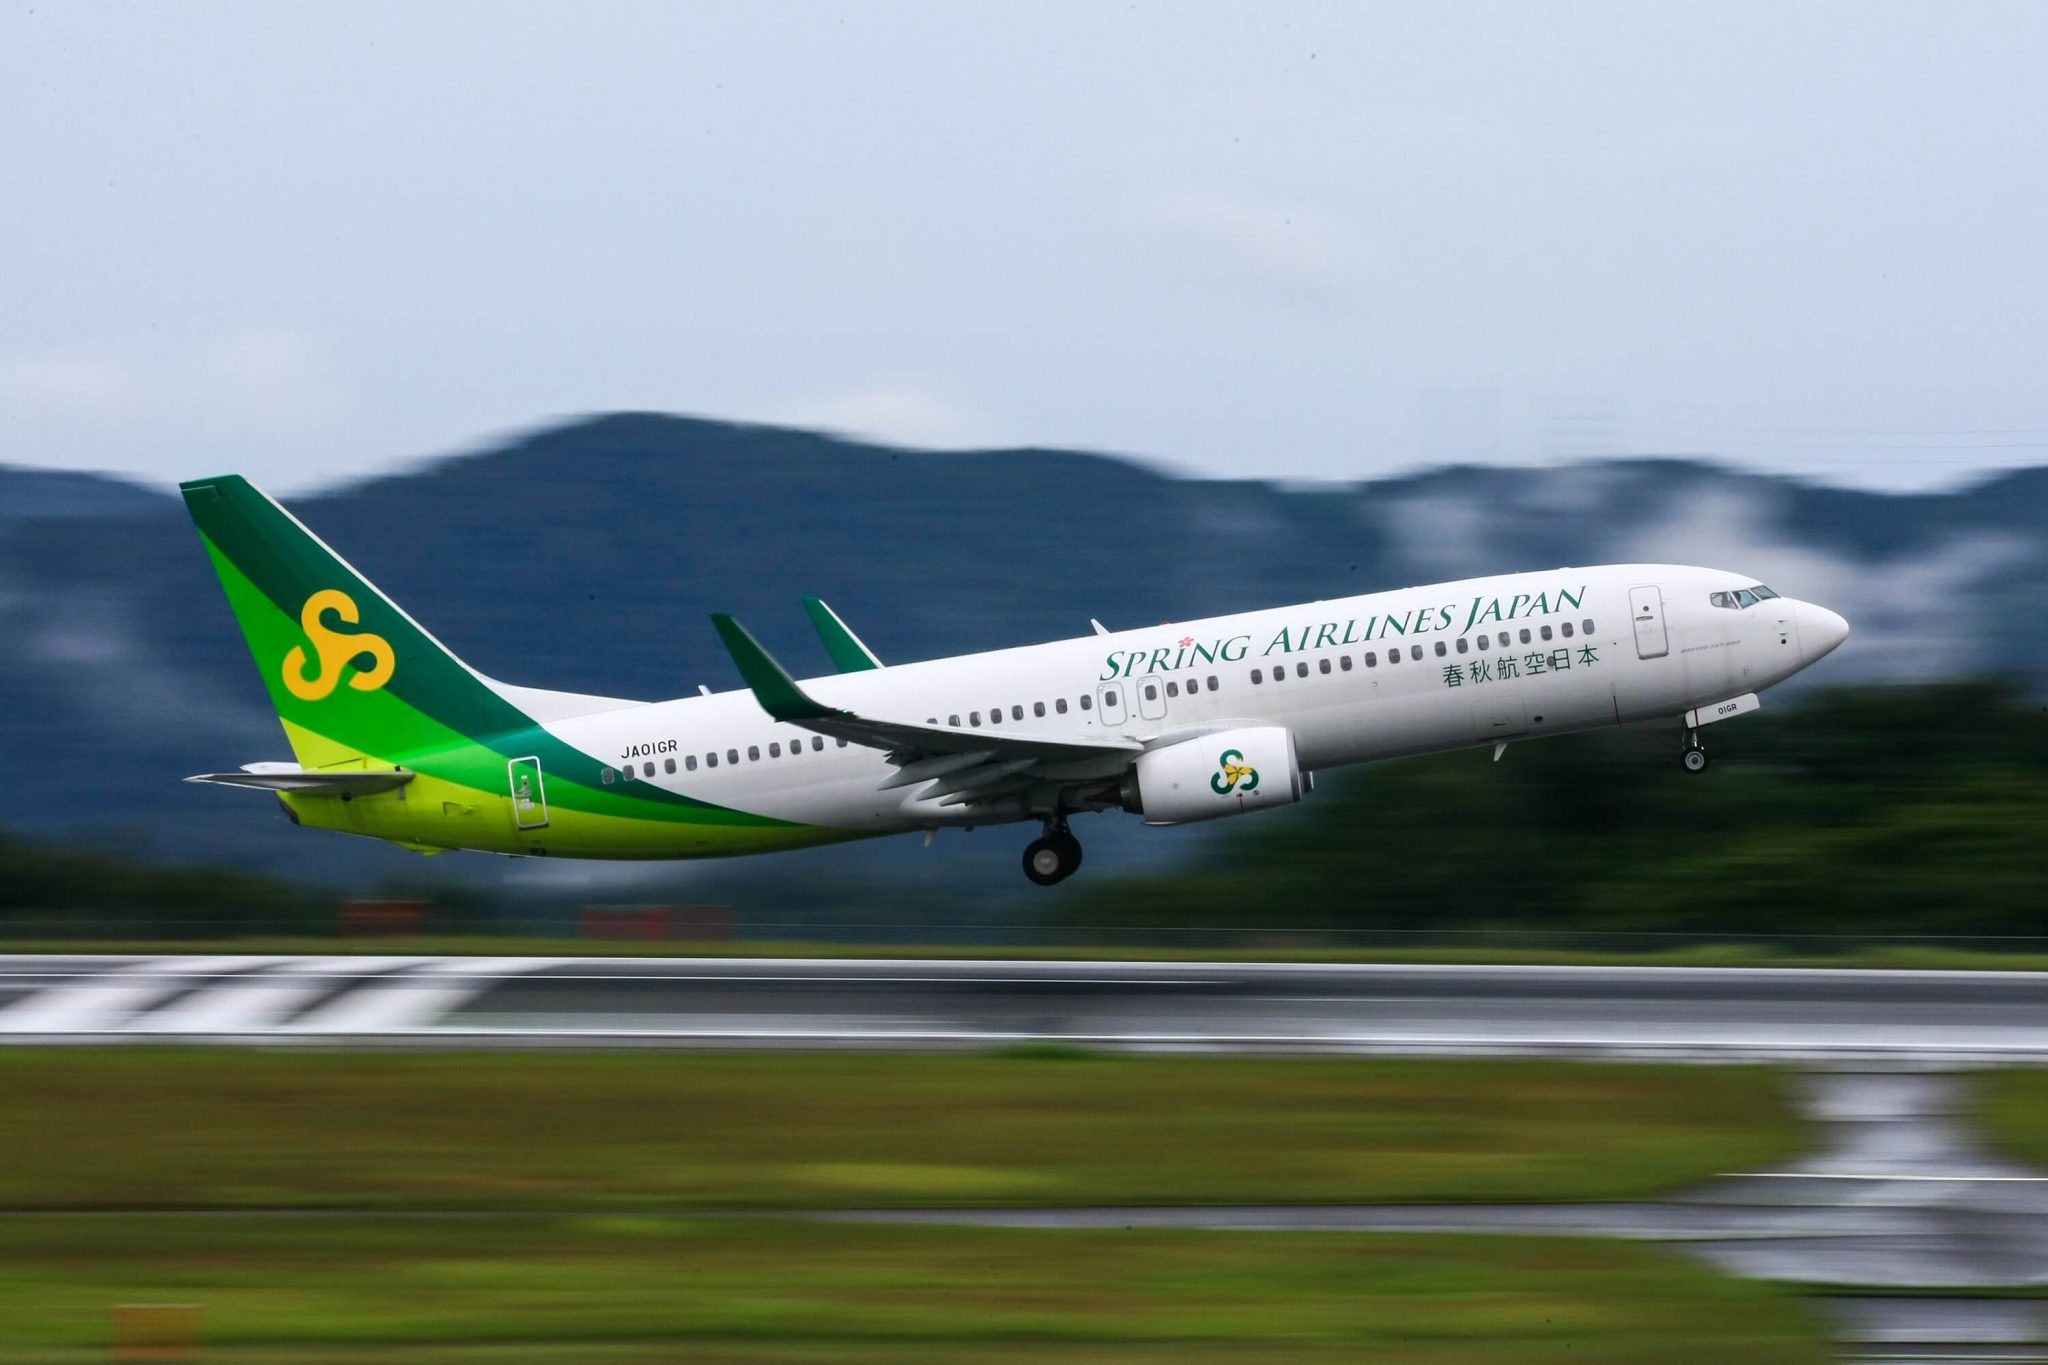 China’s Spring Airlines reports operating revenue rise in H1 2019